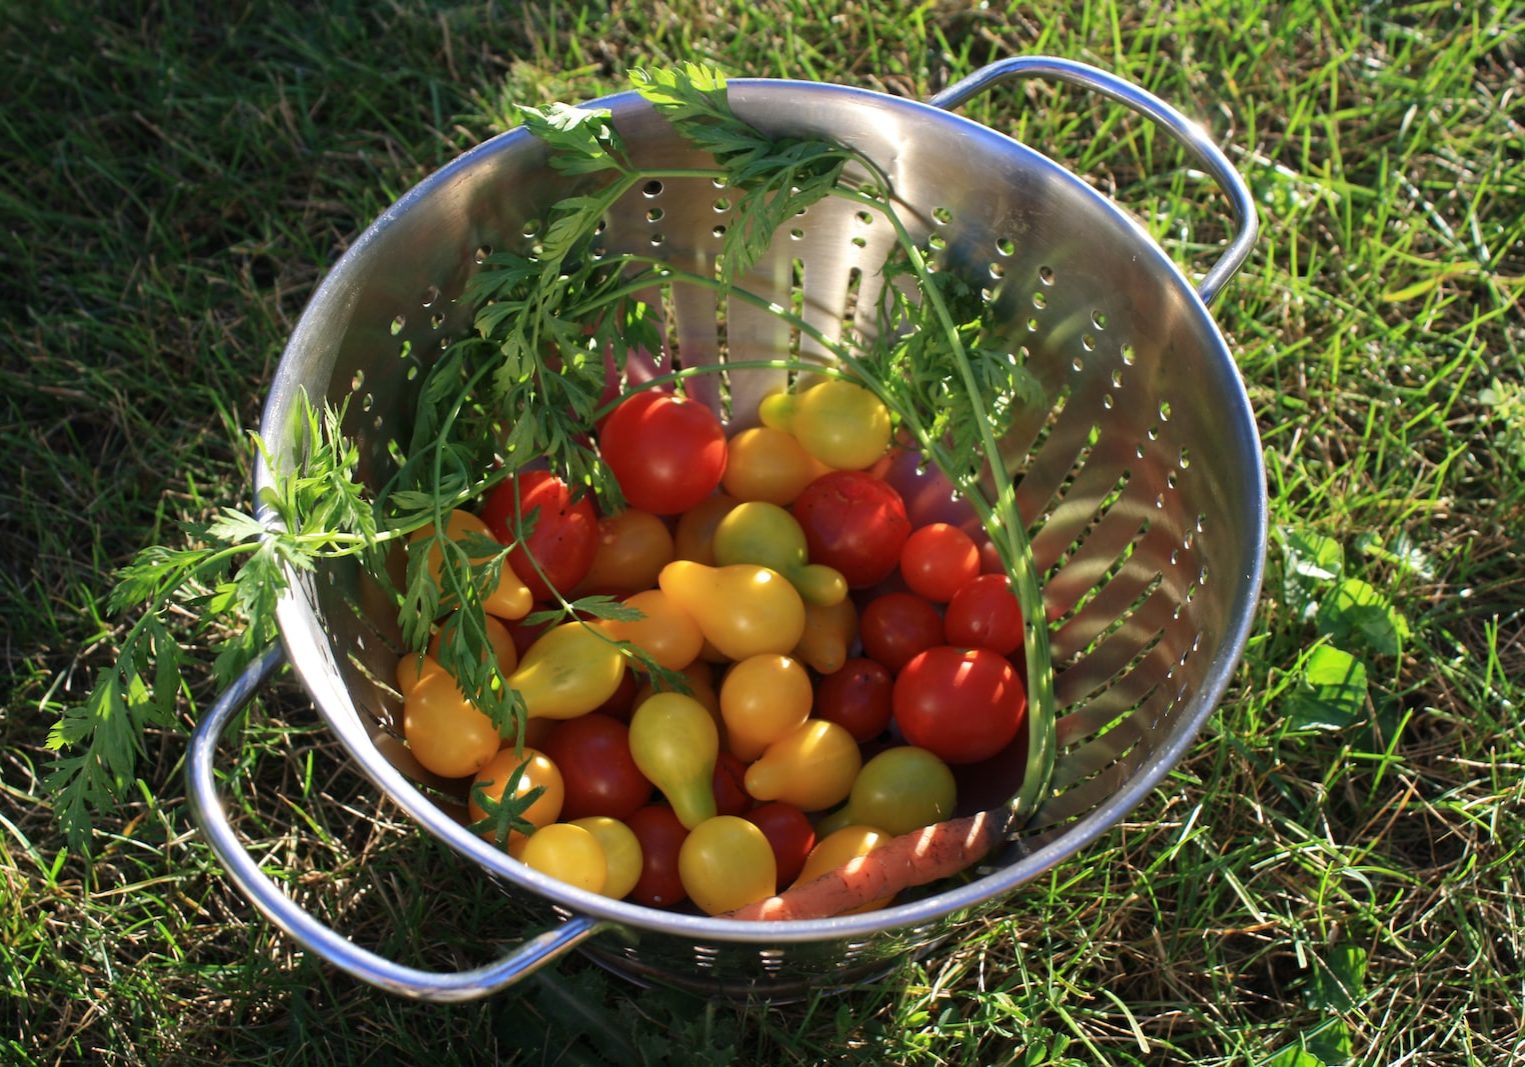 red and yellow round fruits in stainless steel bowl